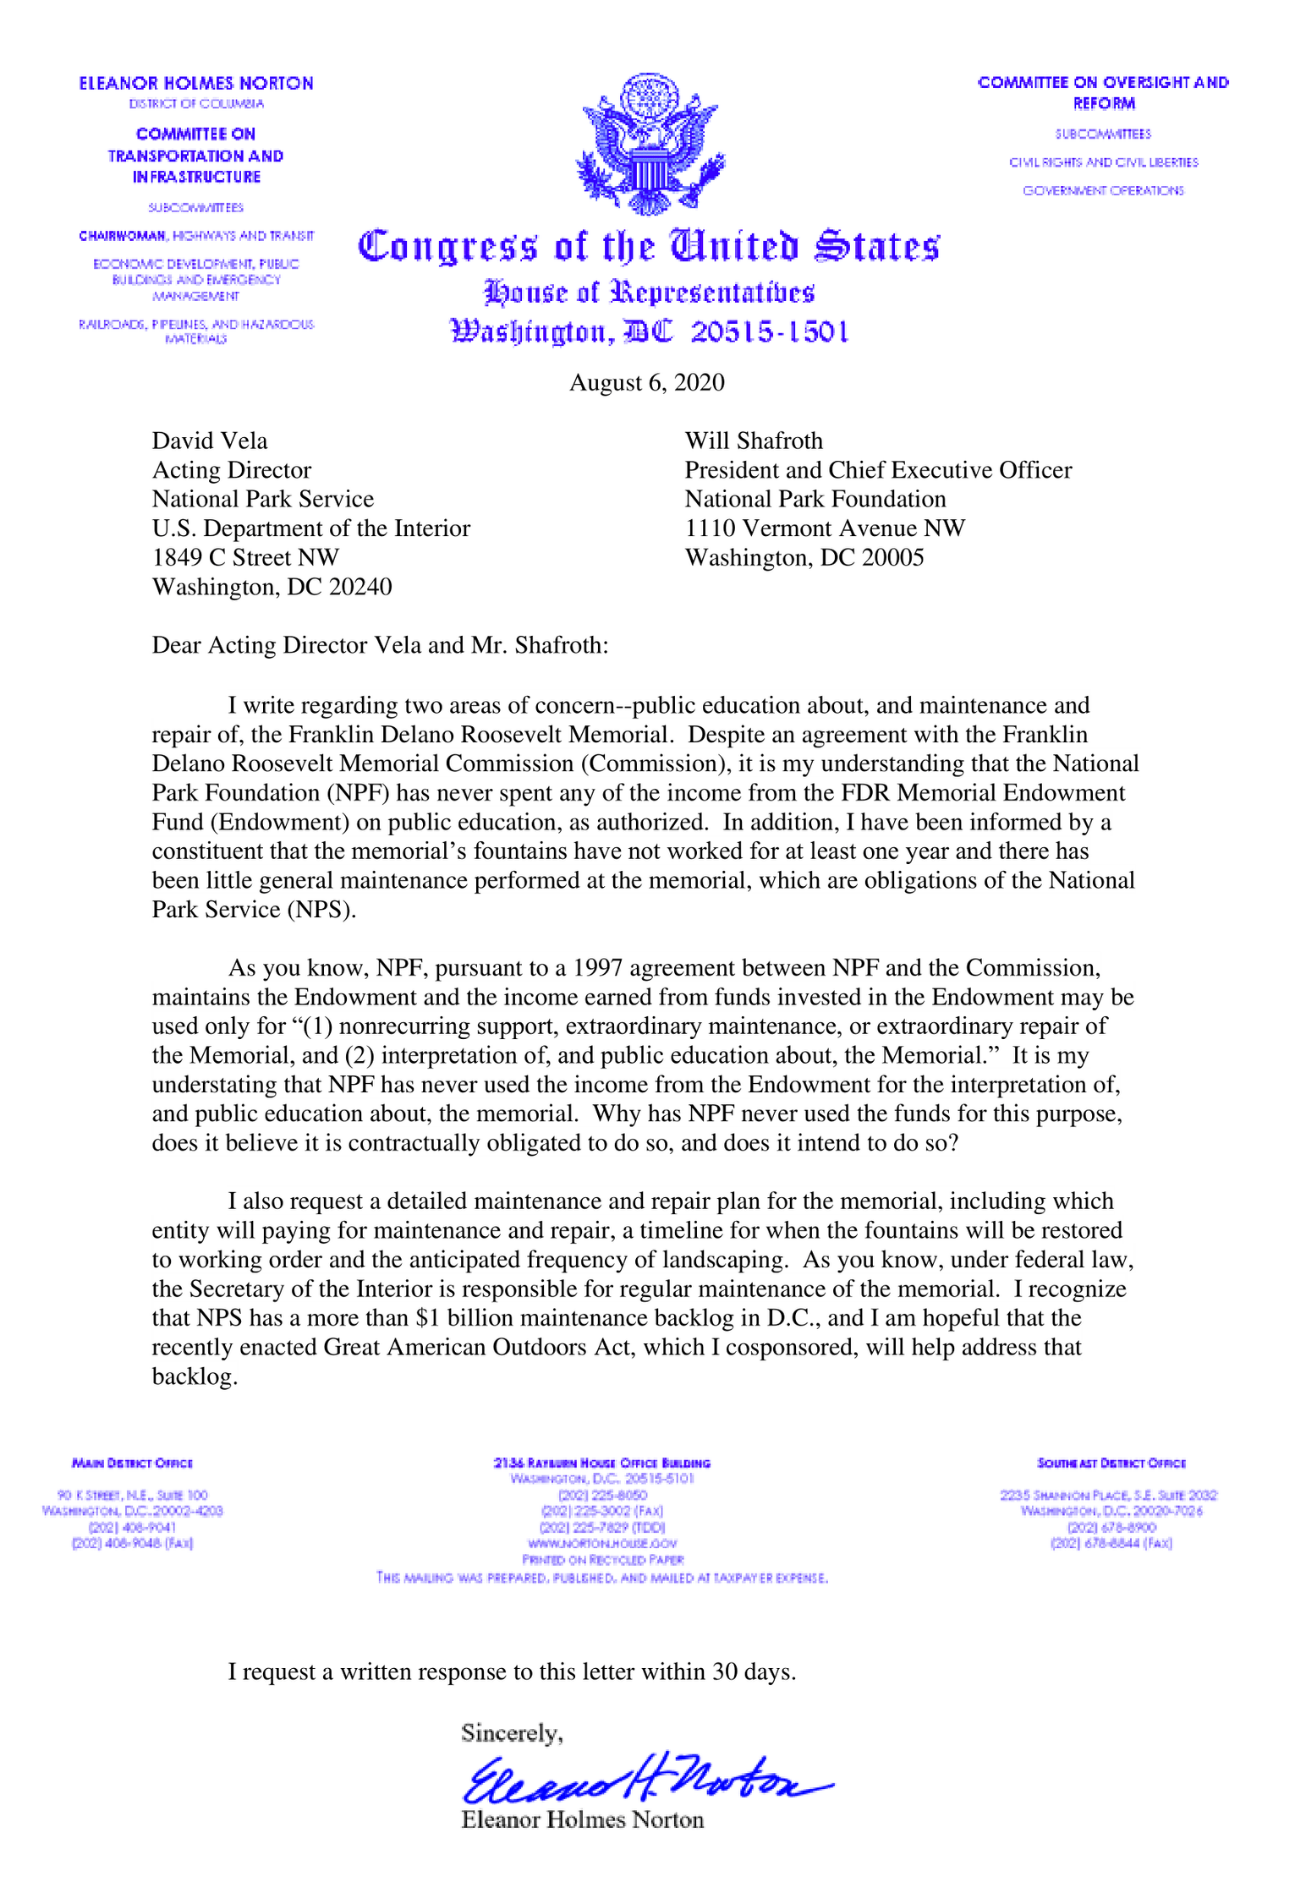 Letter from Eleanor Holmes Norton